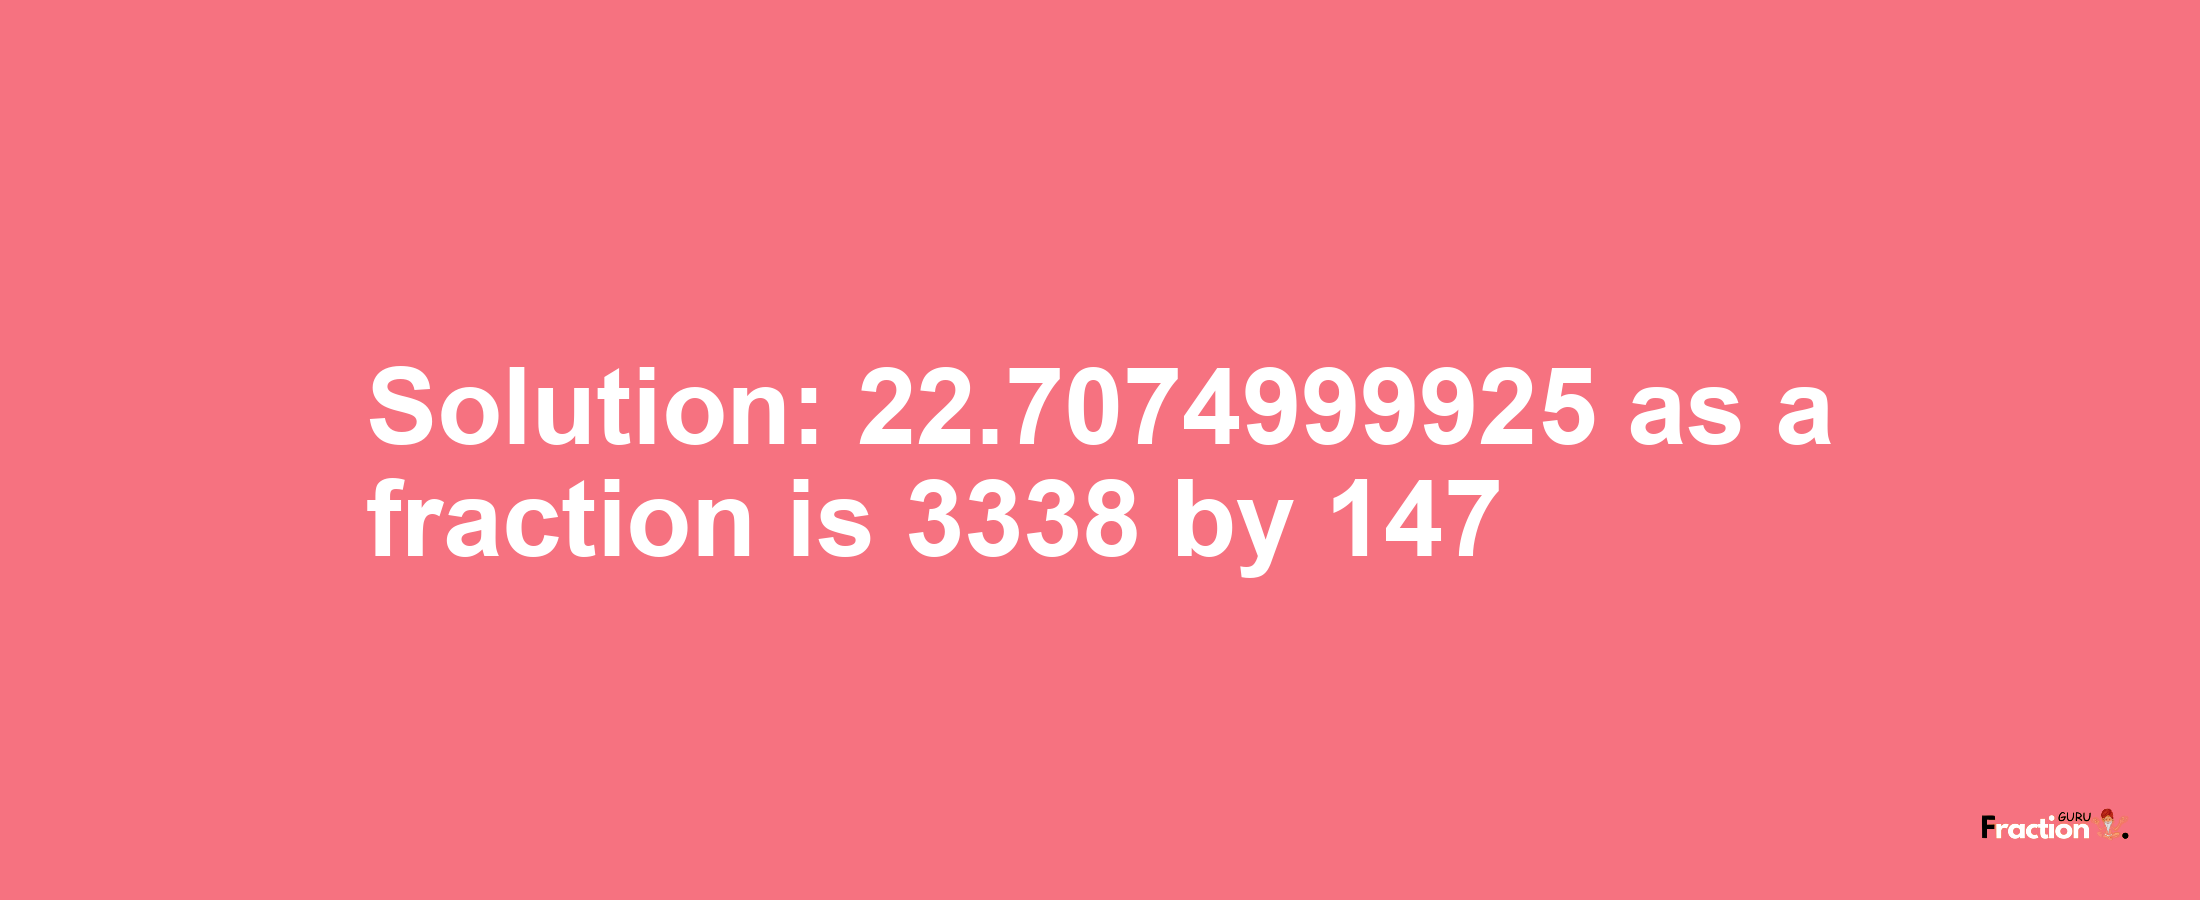 Solution:22.7074999925 as a fraction is 3338/147